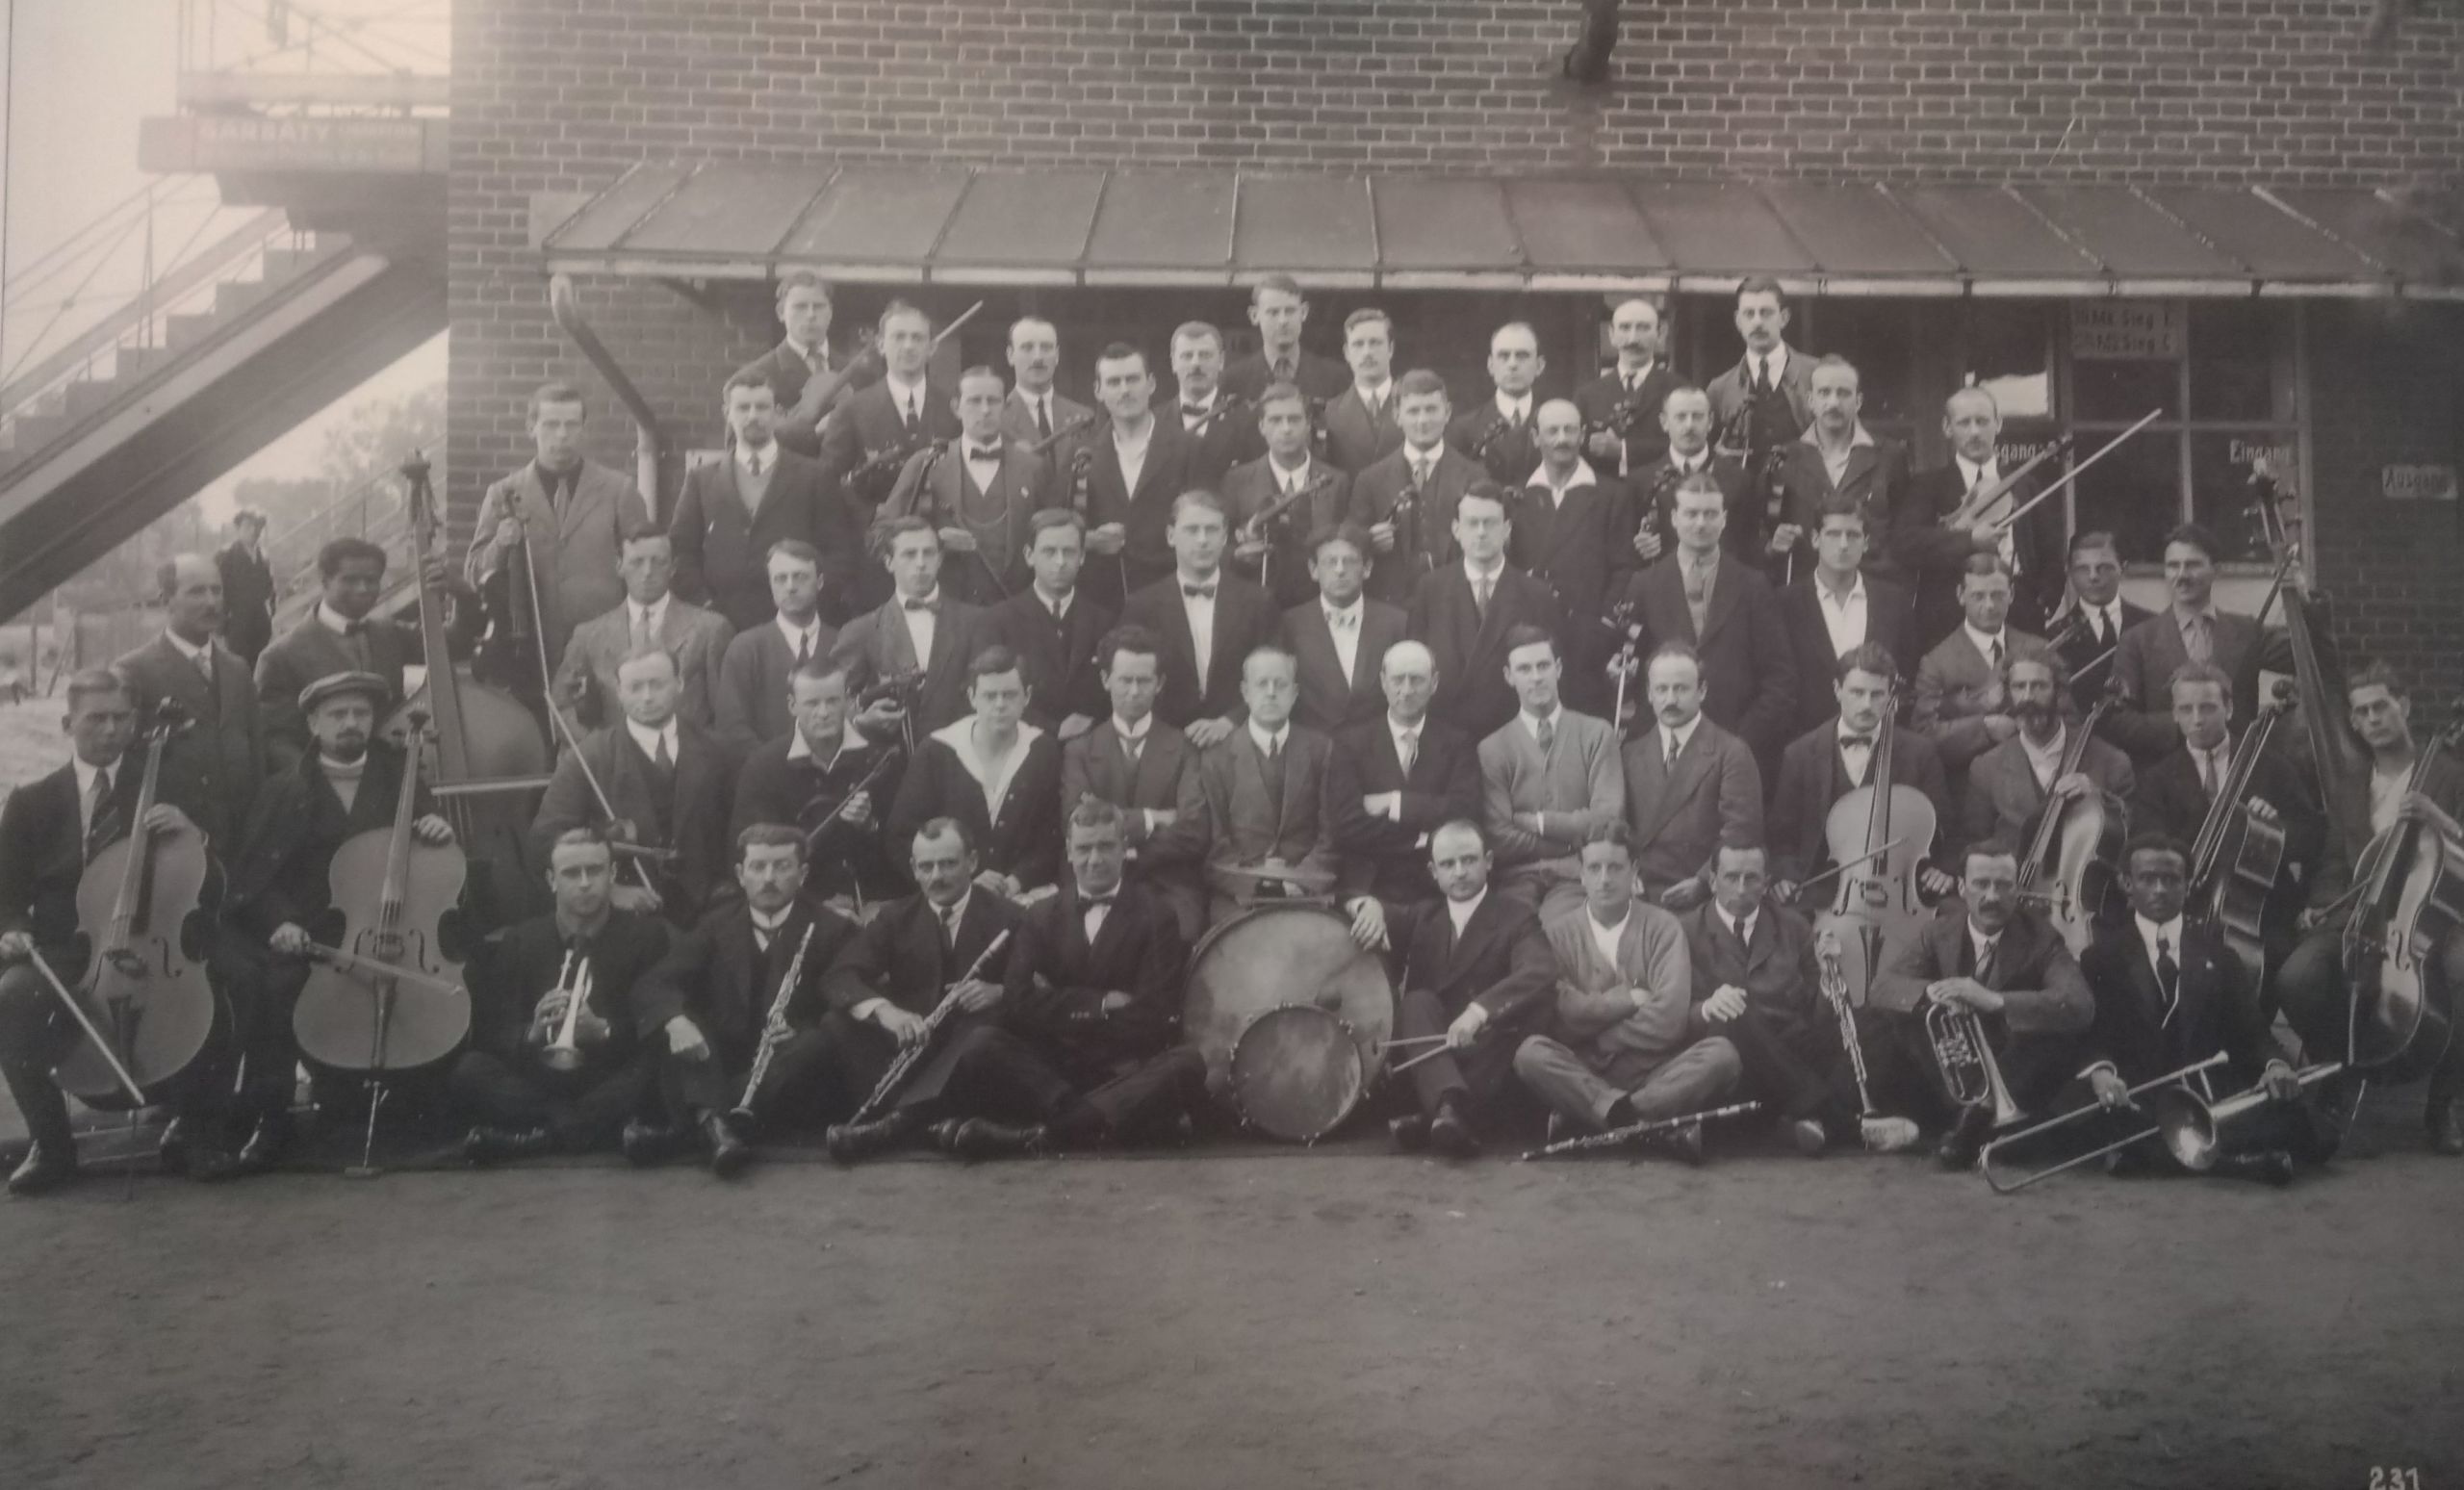 The band from Ruhleben camp, including Macmillan as one of the conductors in the centre